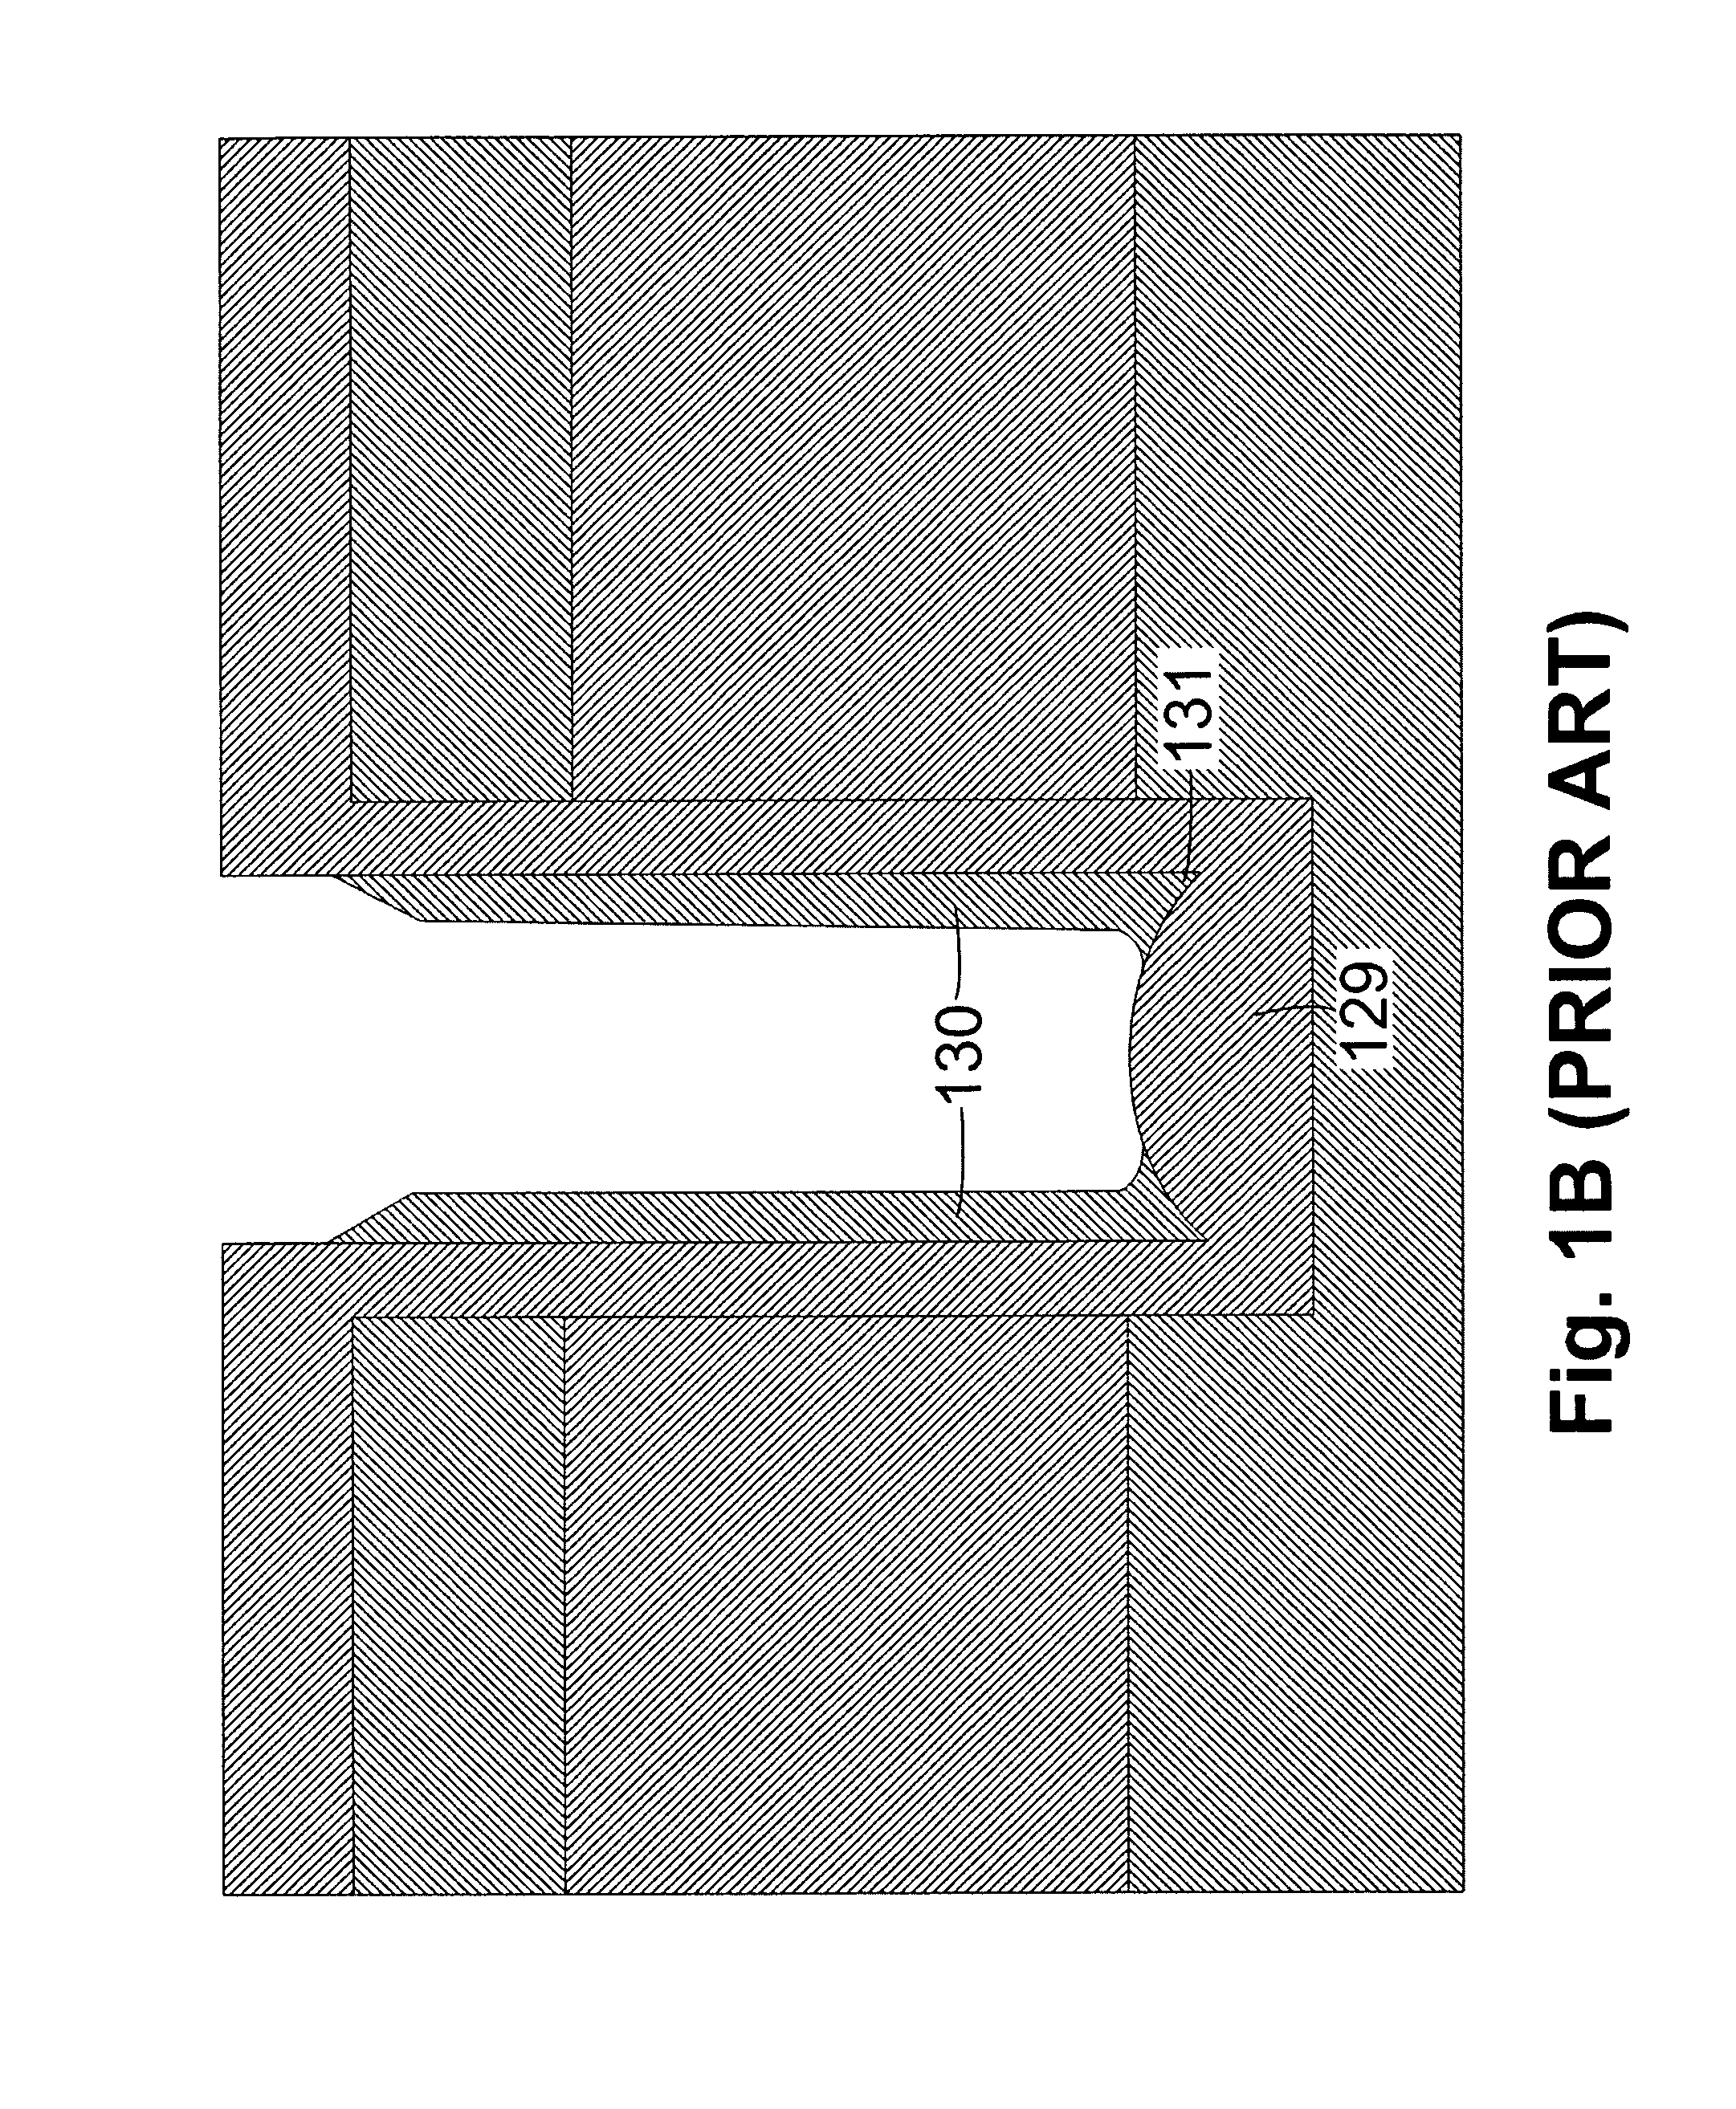 Method for making trench MOSFET with shallow trench structures